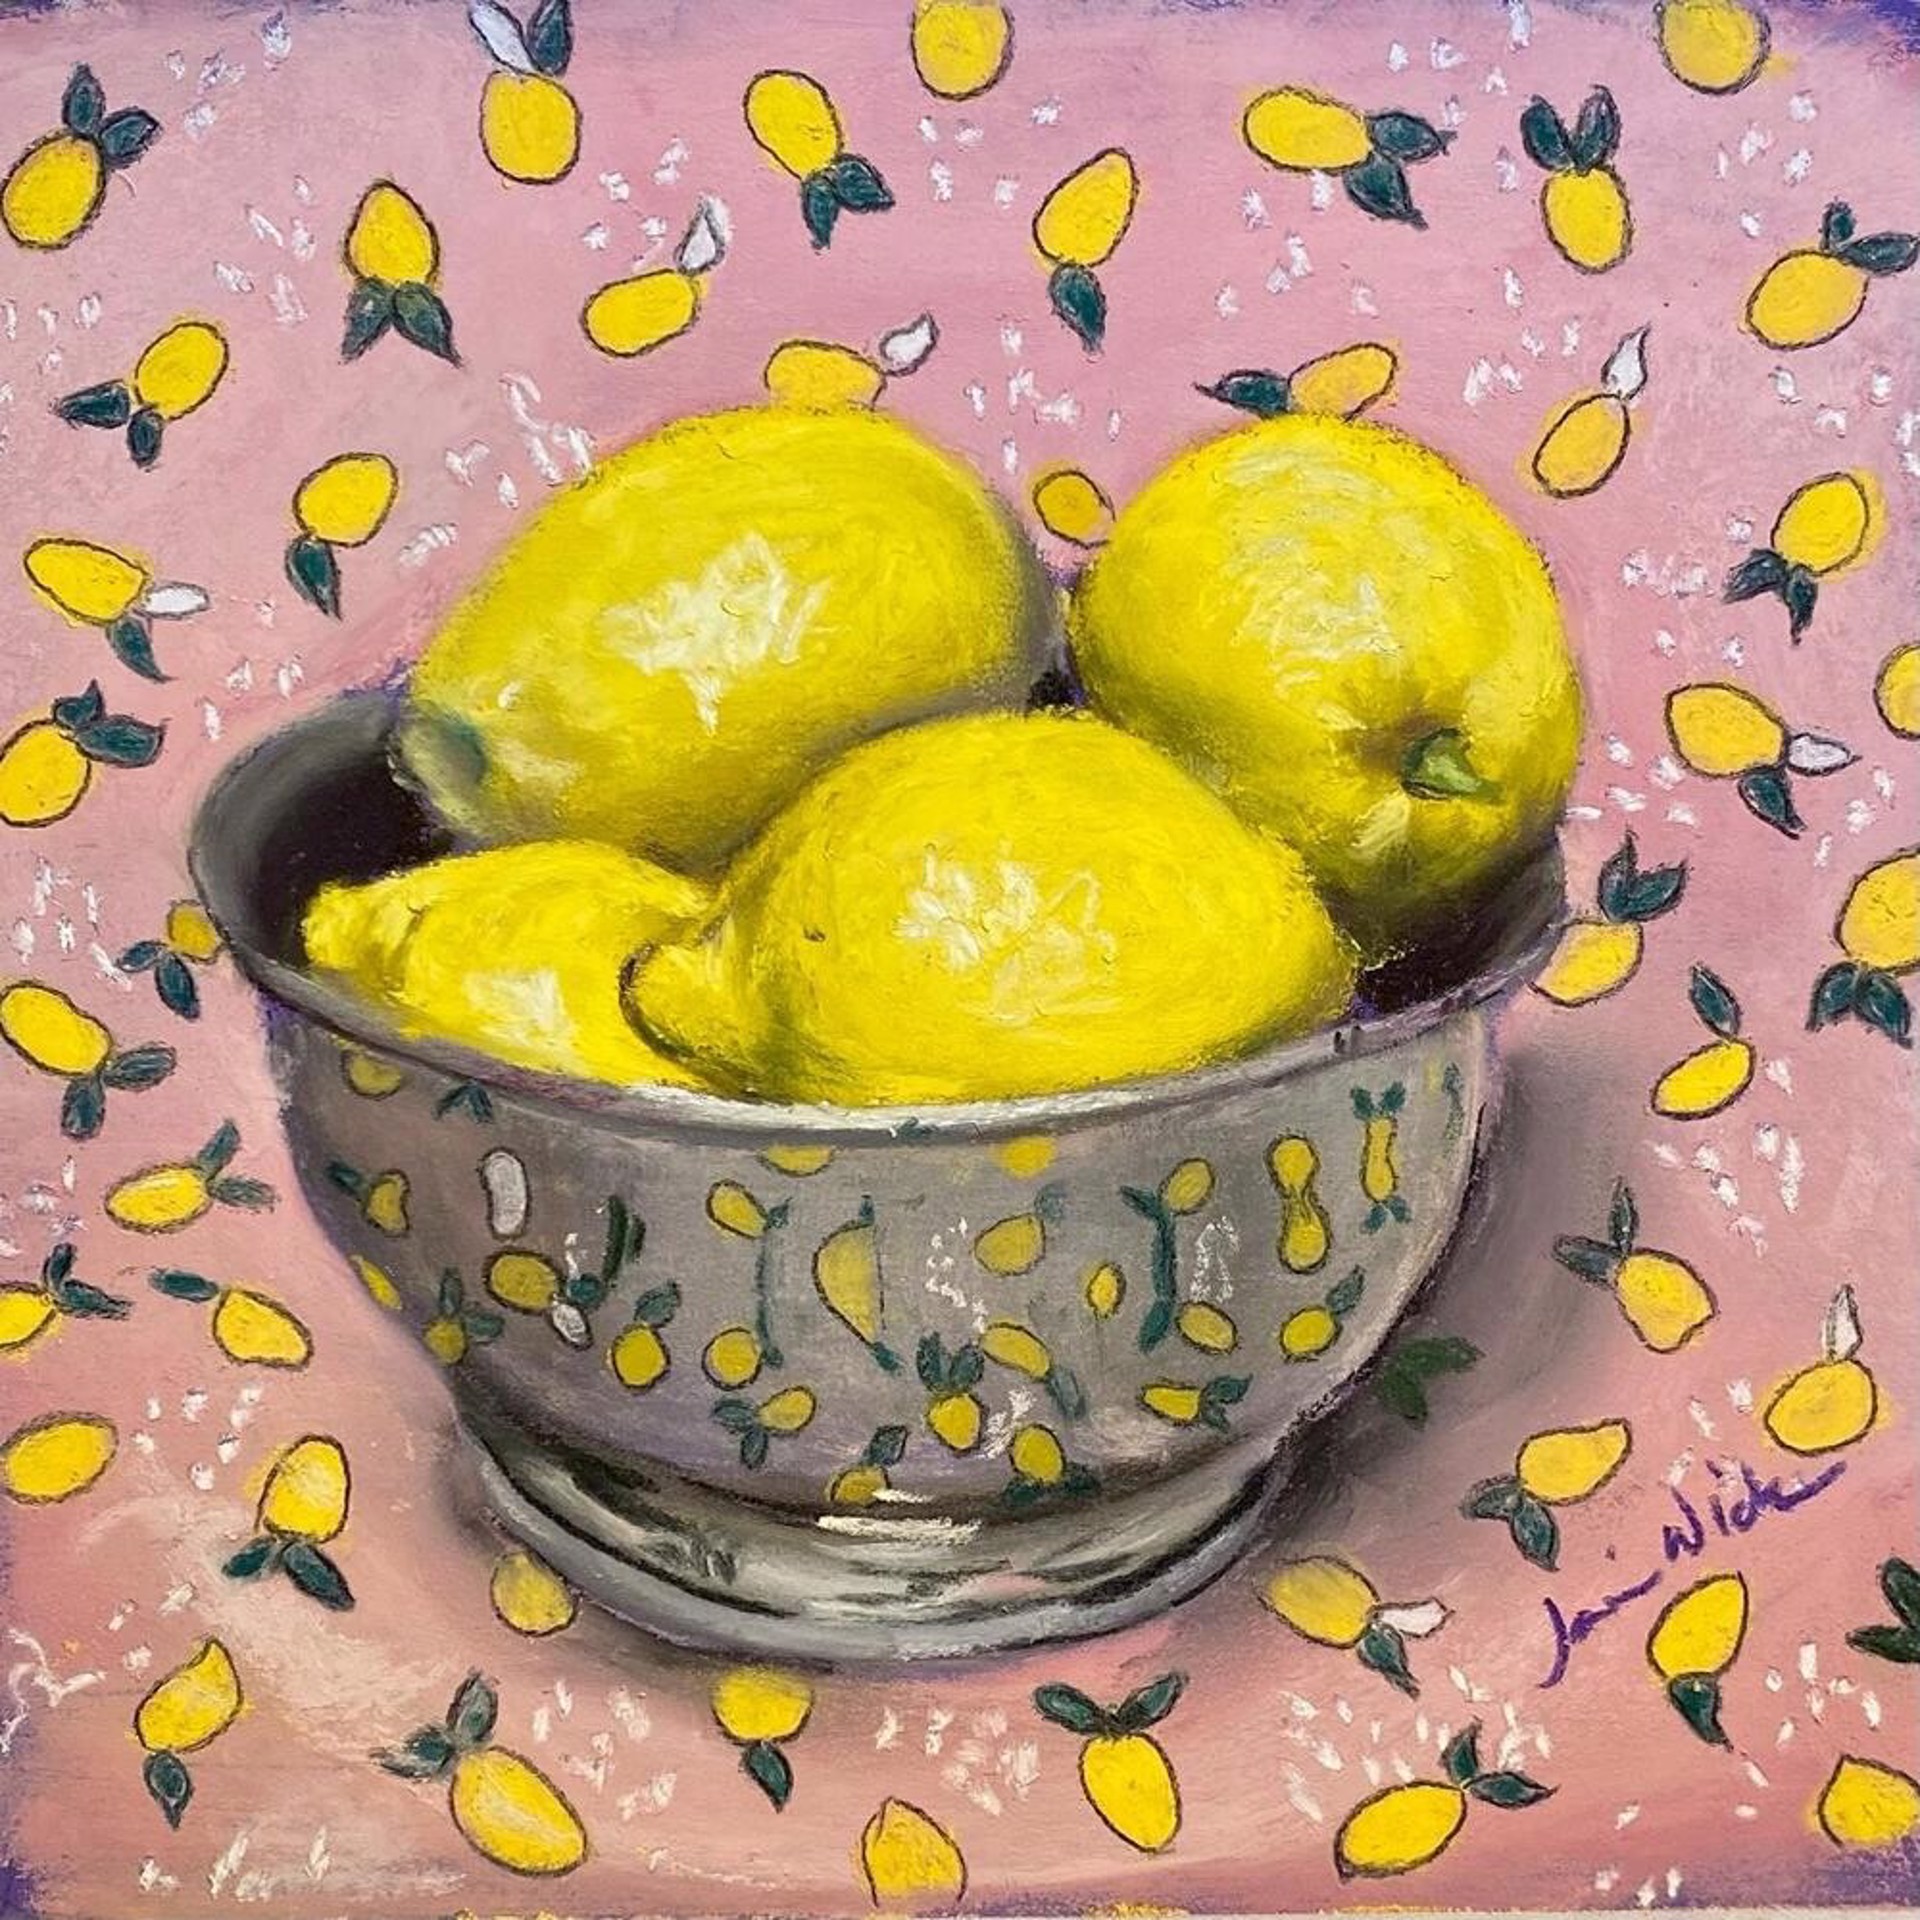 I Was Given Lemons by Jamie Wick